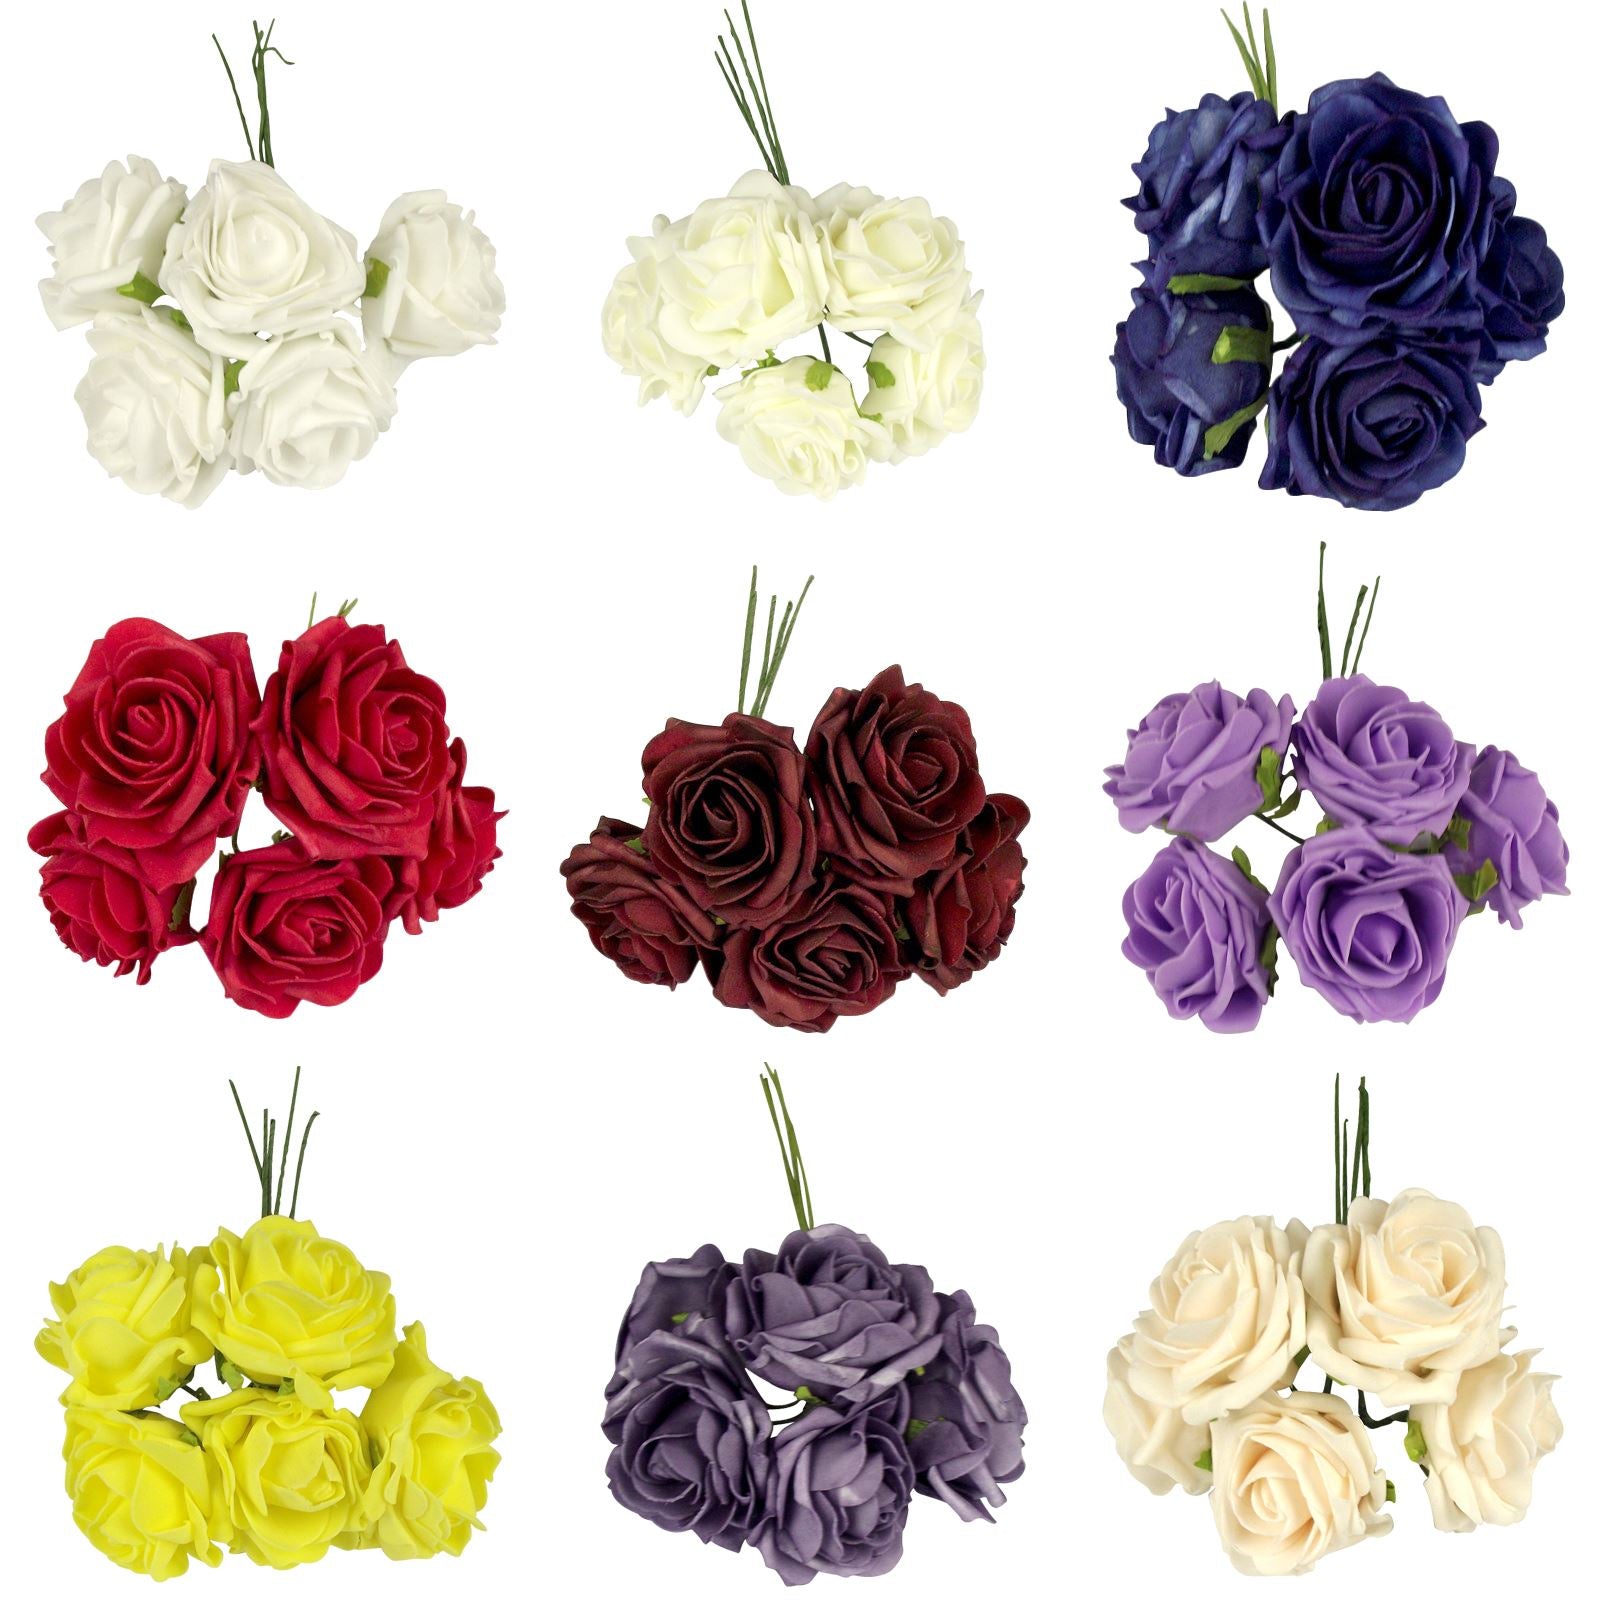 Bunch of 5 Large Soft Foam Roses